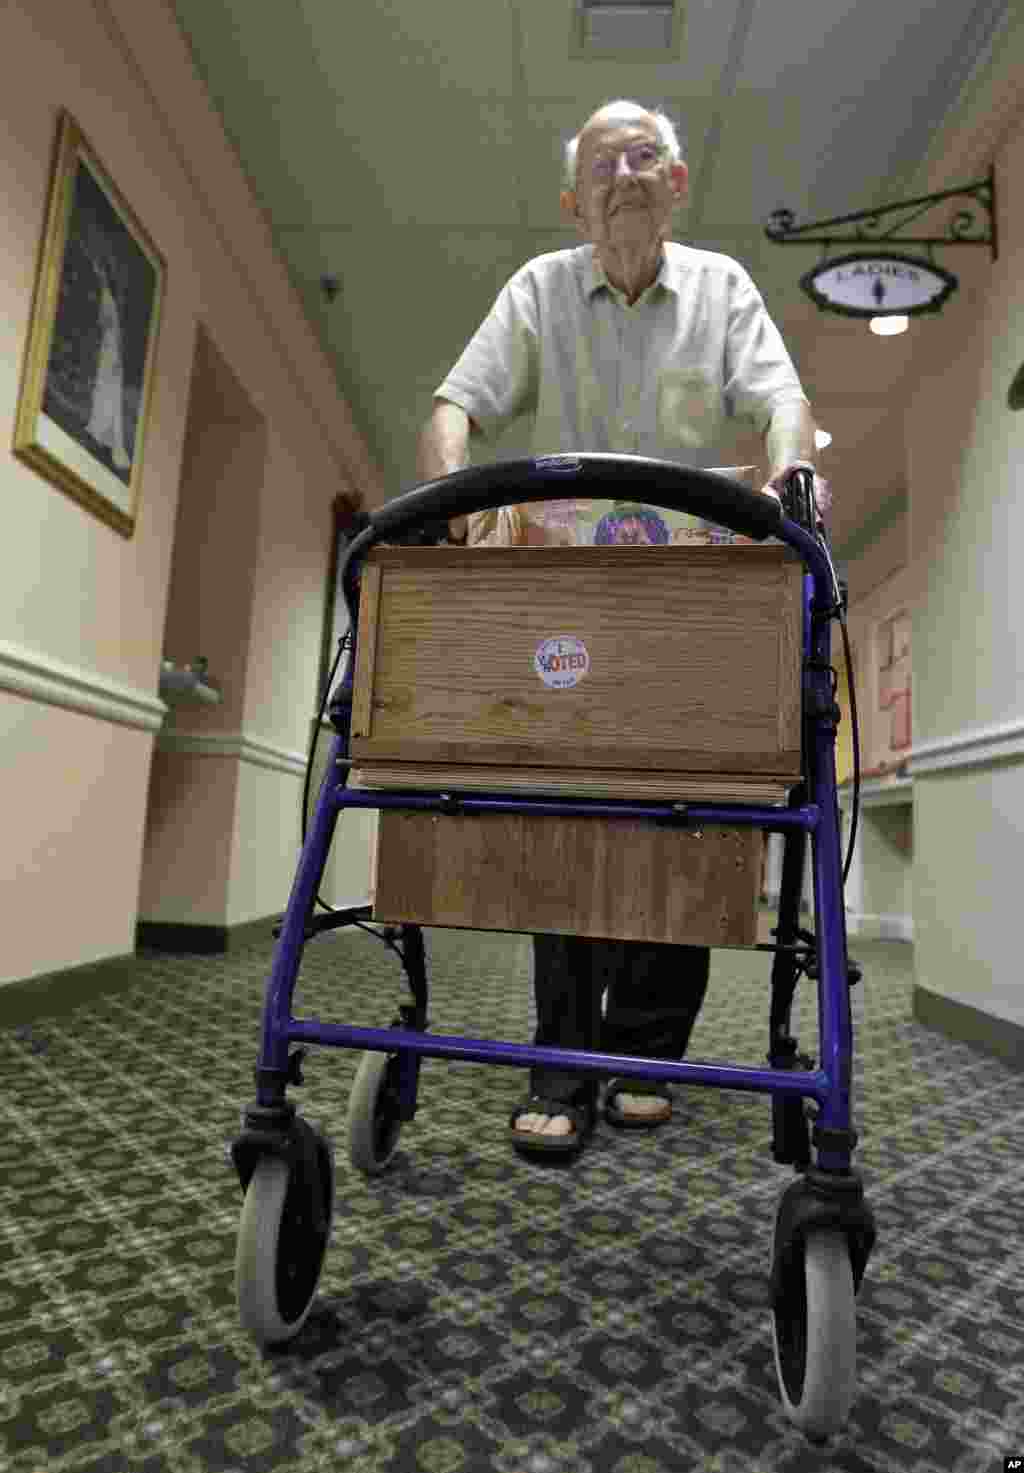 87-year old voter Rolf Kleinwort placed his &quot;I Voted&quot; sticker on the front of his walker as he heads back to his residence at the St. Andrews Estates North retirment community in Boca Raton, Florida.